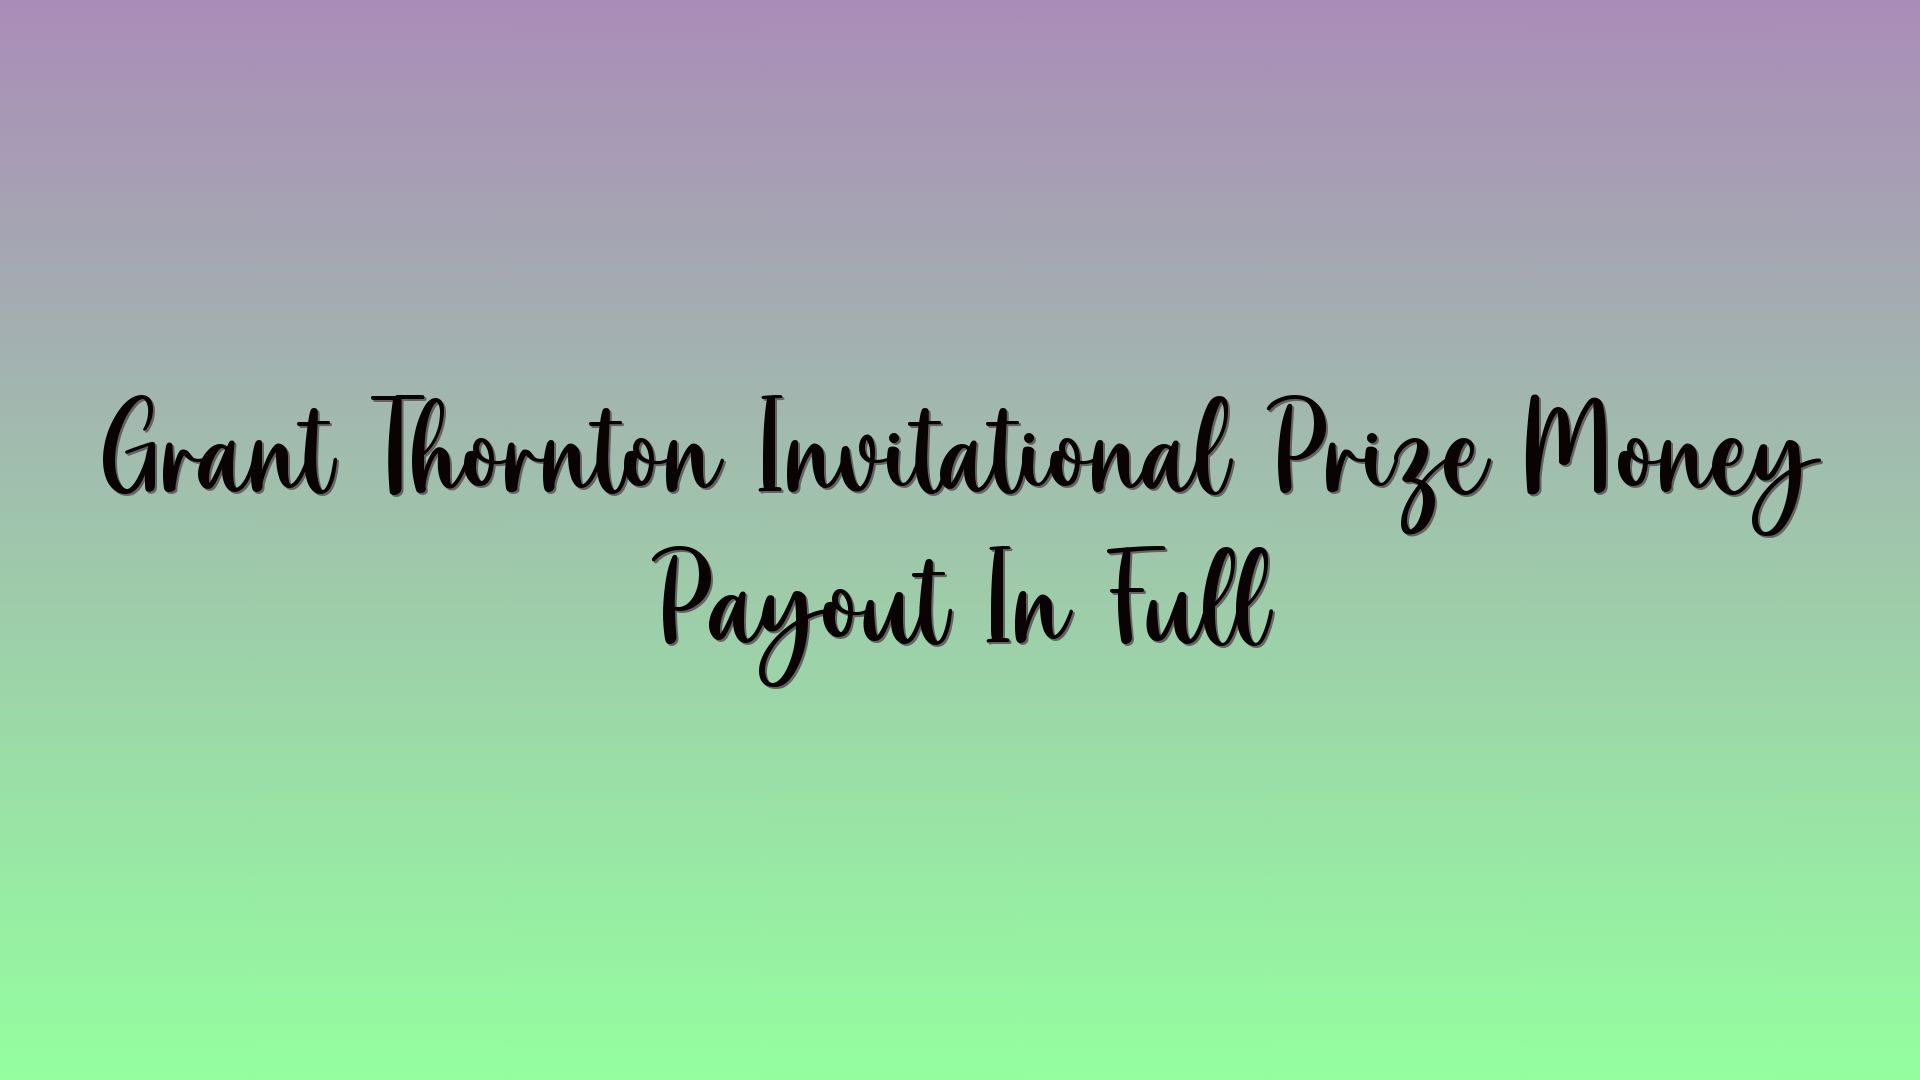 Grant Thornton Invitational Prize Money Payout In Full